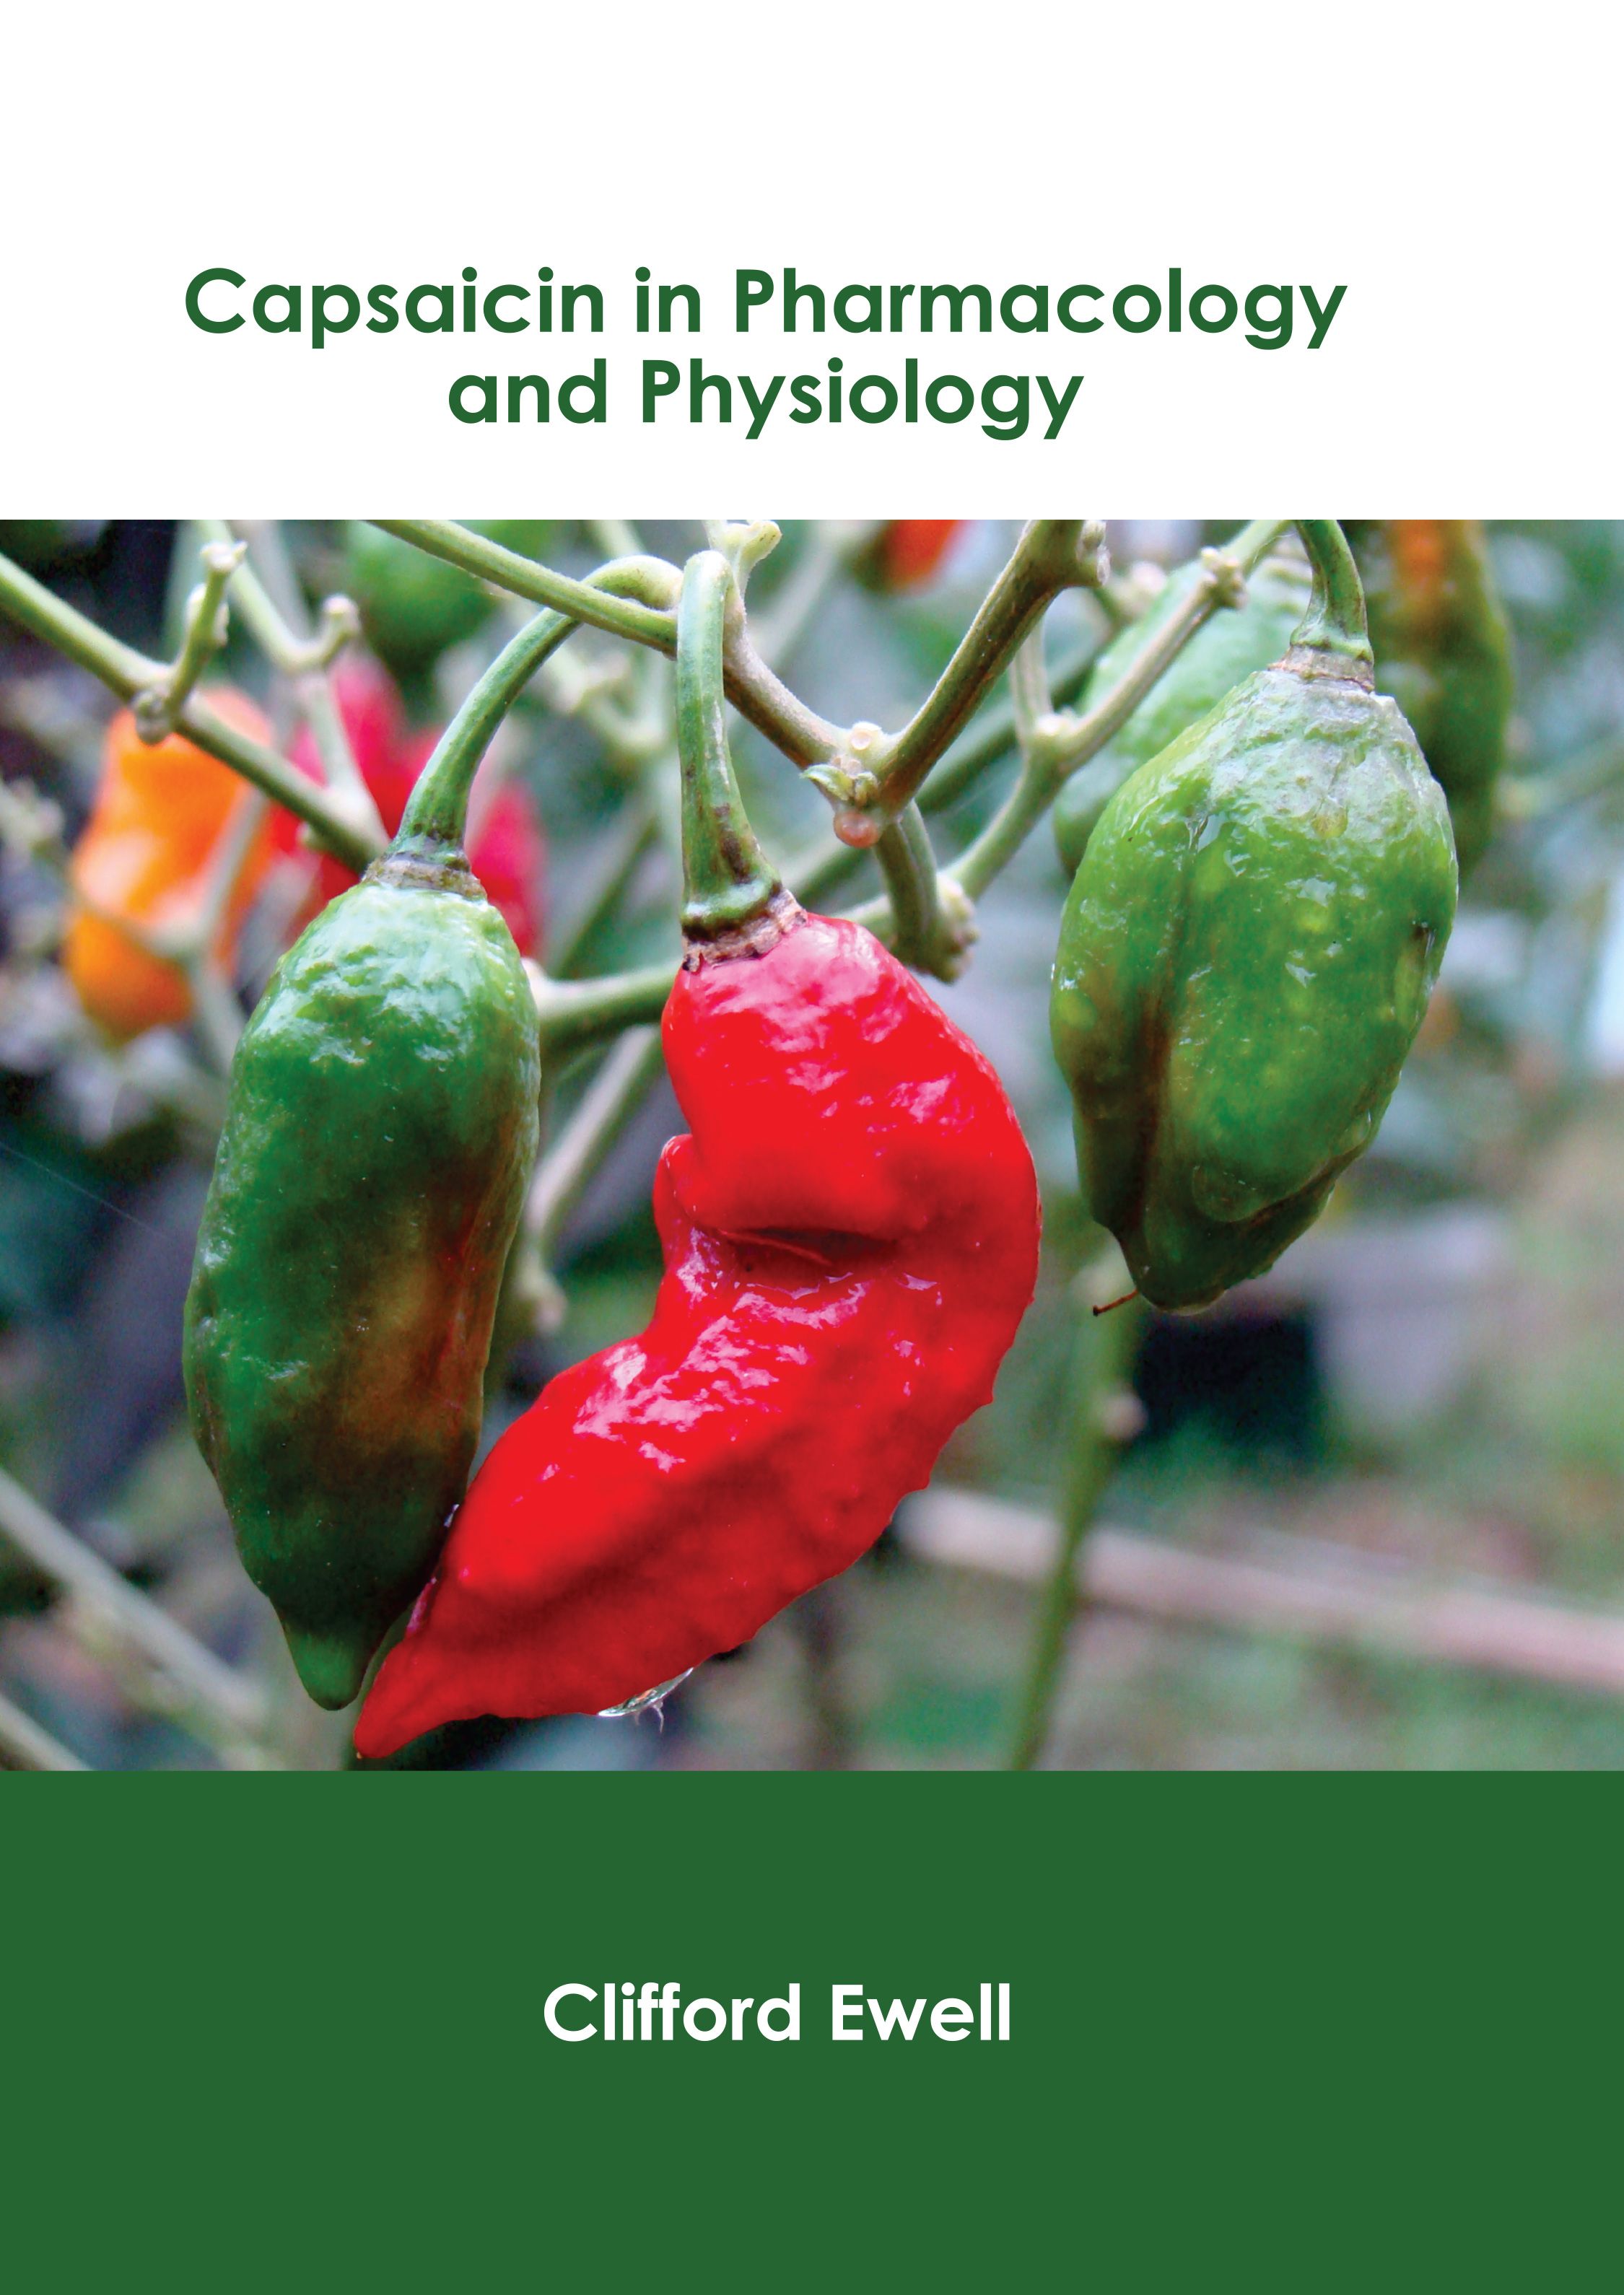 CAPSAICIN IN PHARMACOLOGY AND PHYSIOLOGY